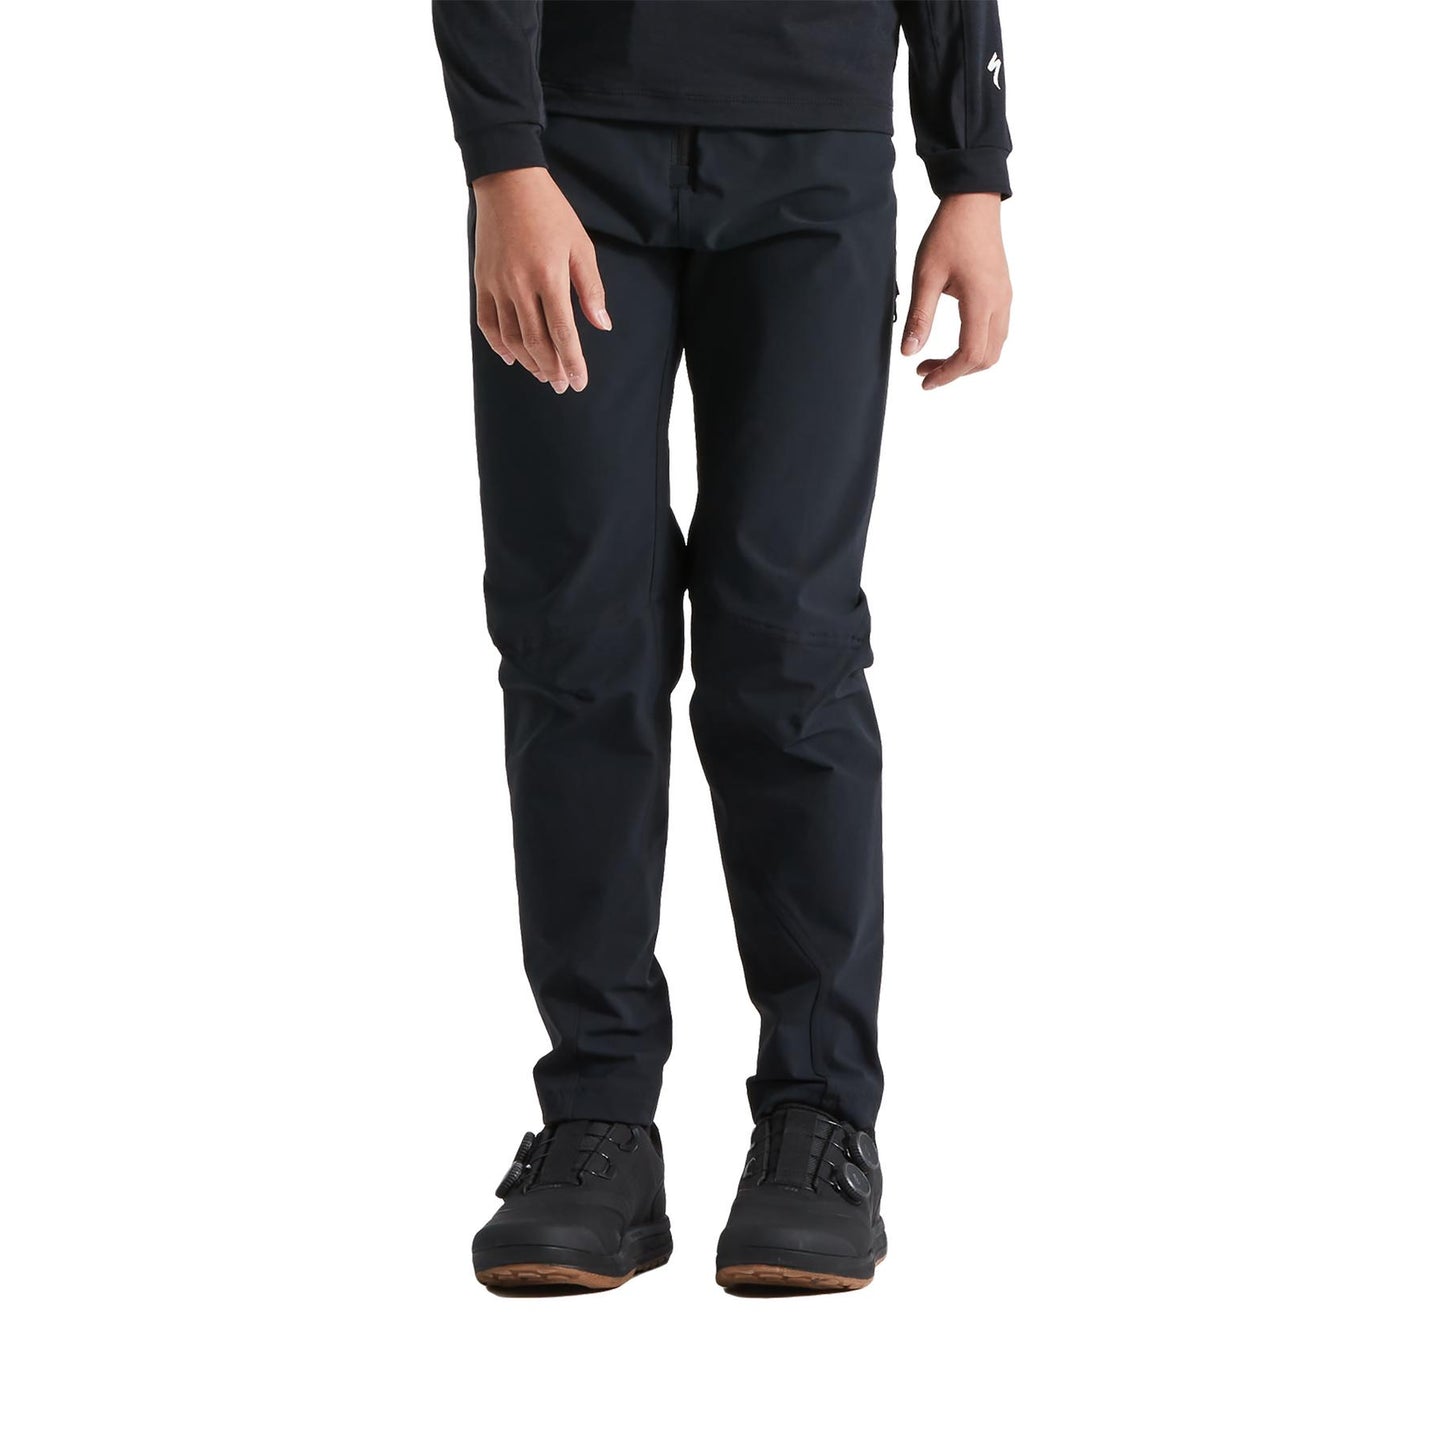 Youth Trail Pant in Black